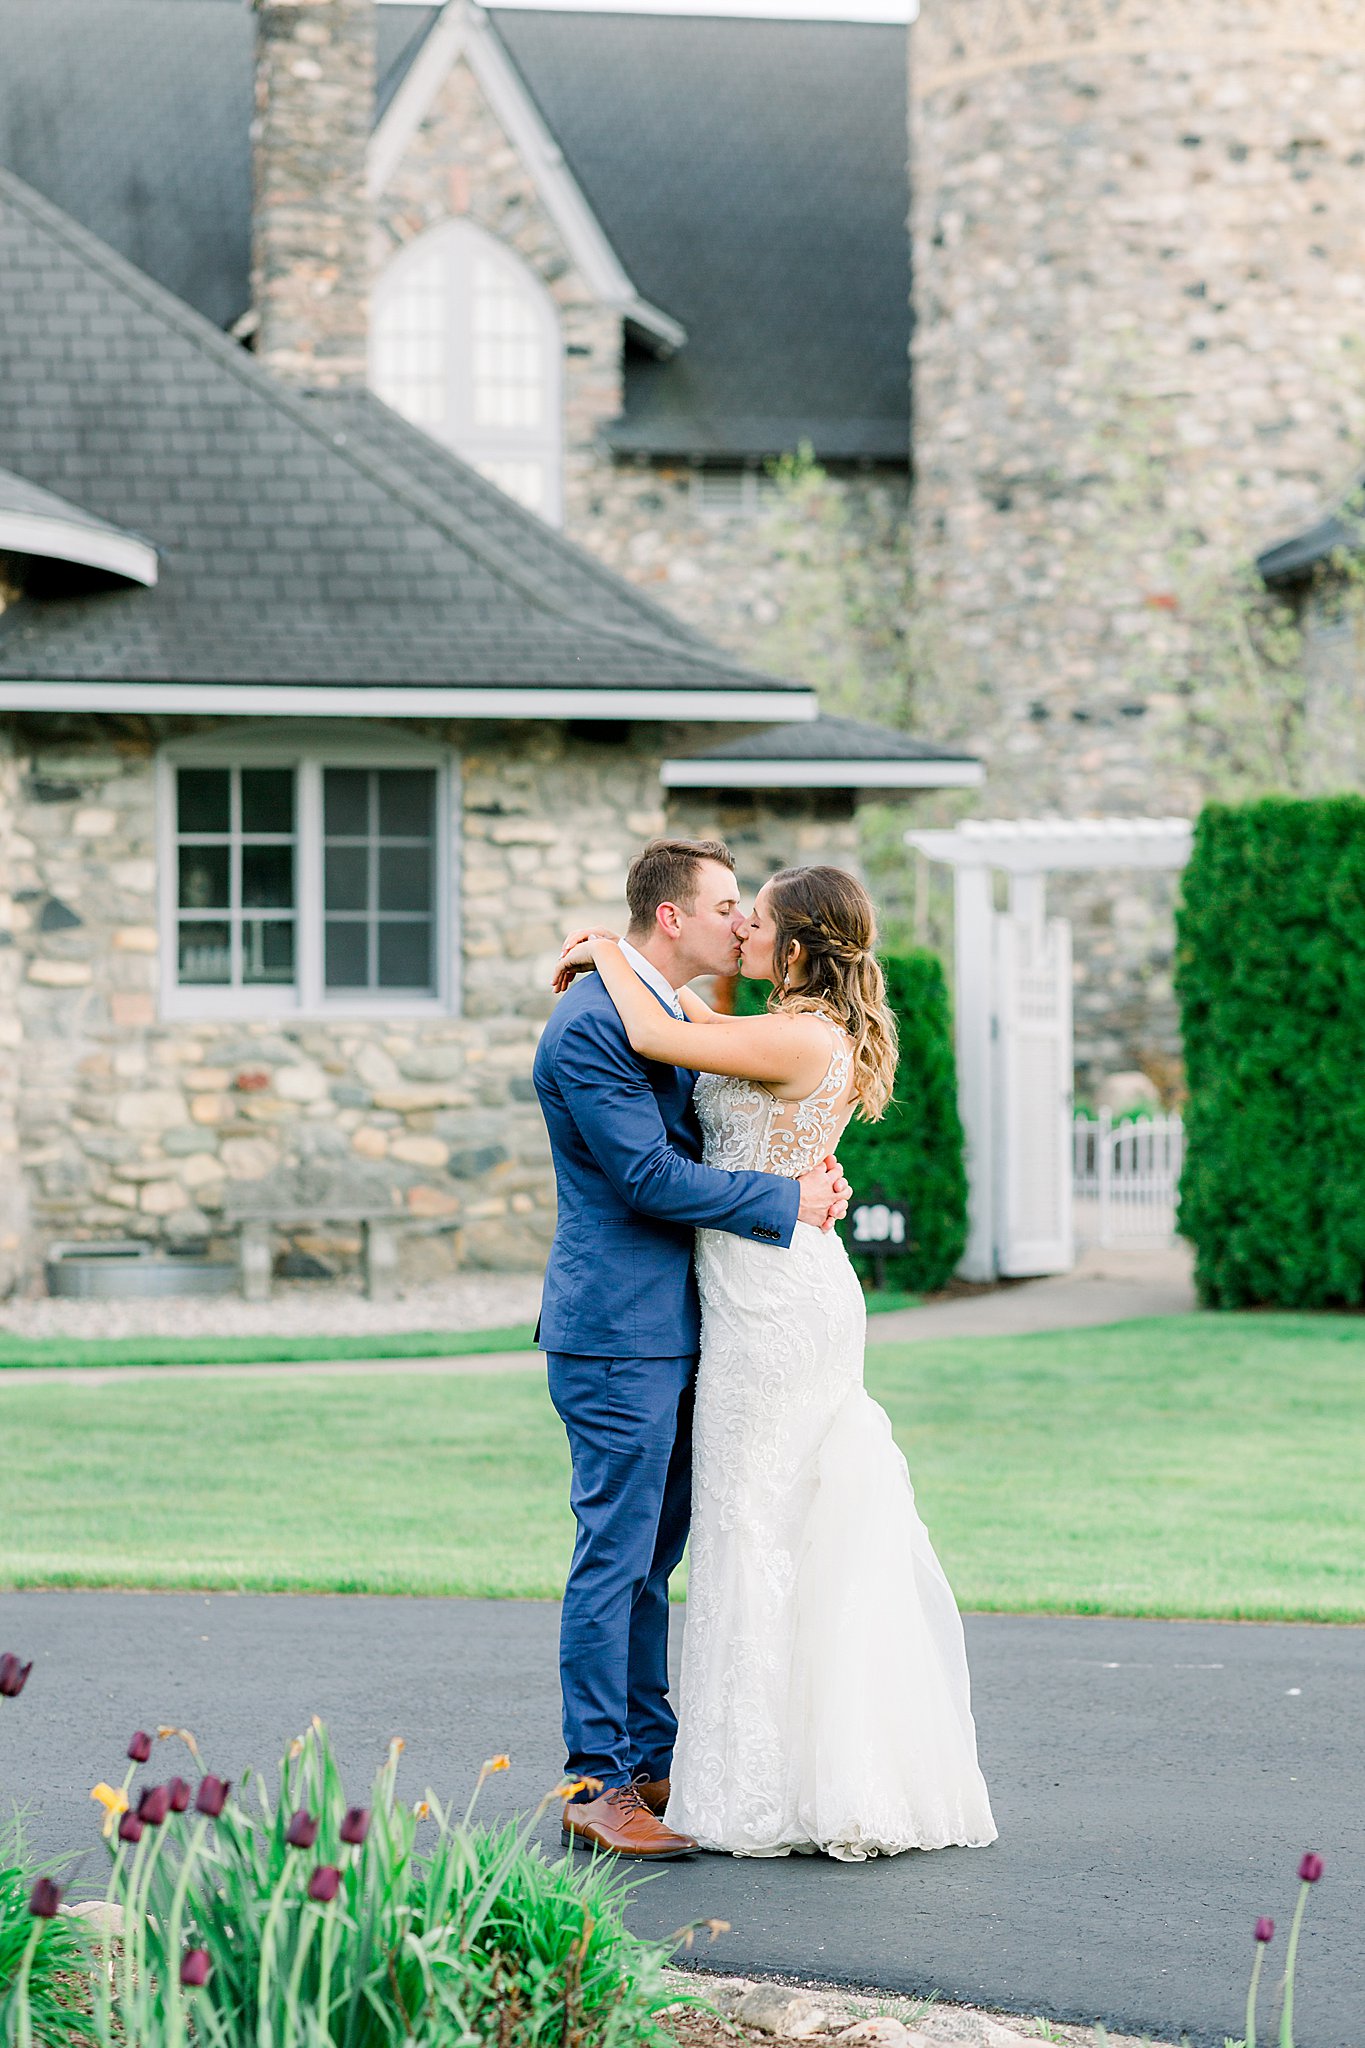 Groom kisses bride in front of Castle Farms gardens during Spring Castle Farms wedding.